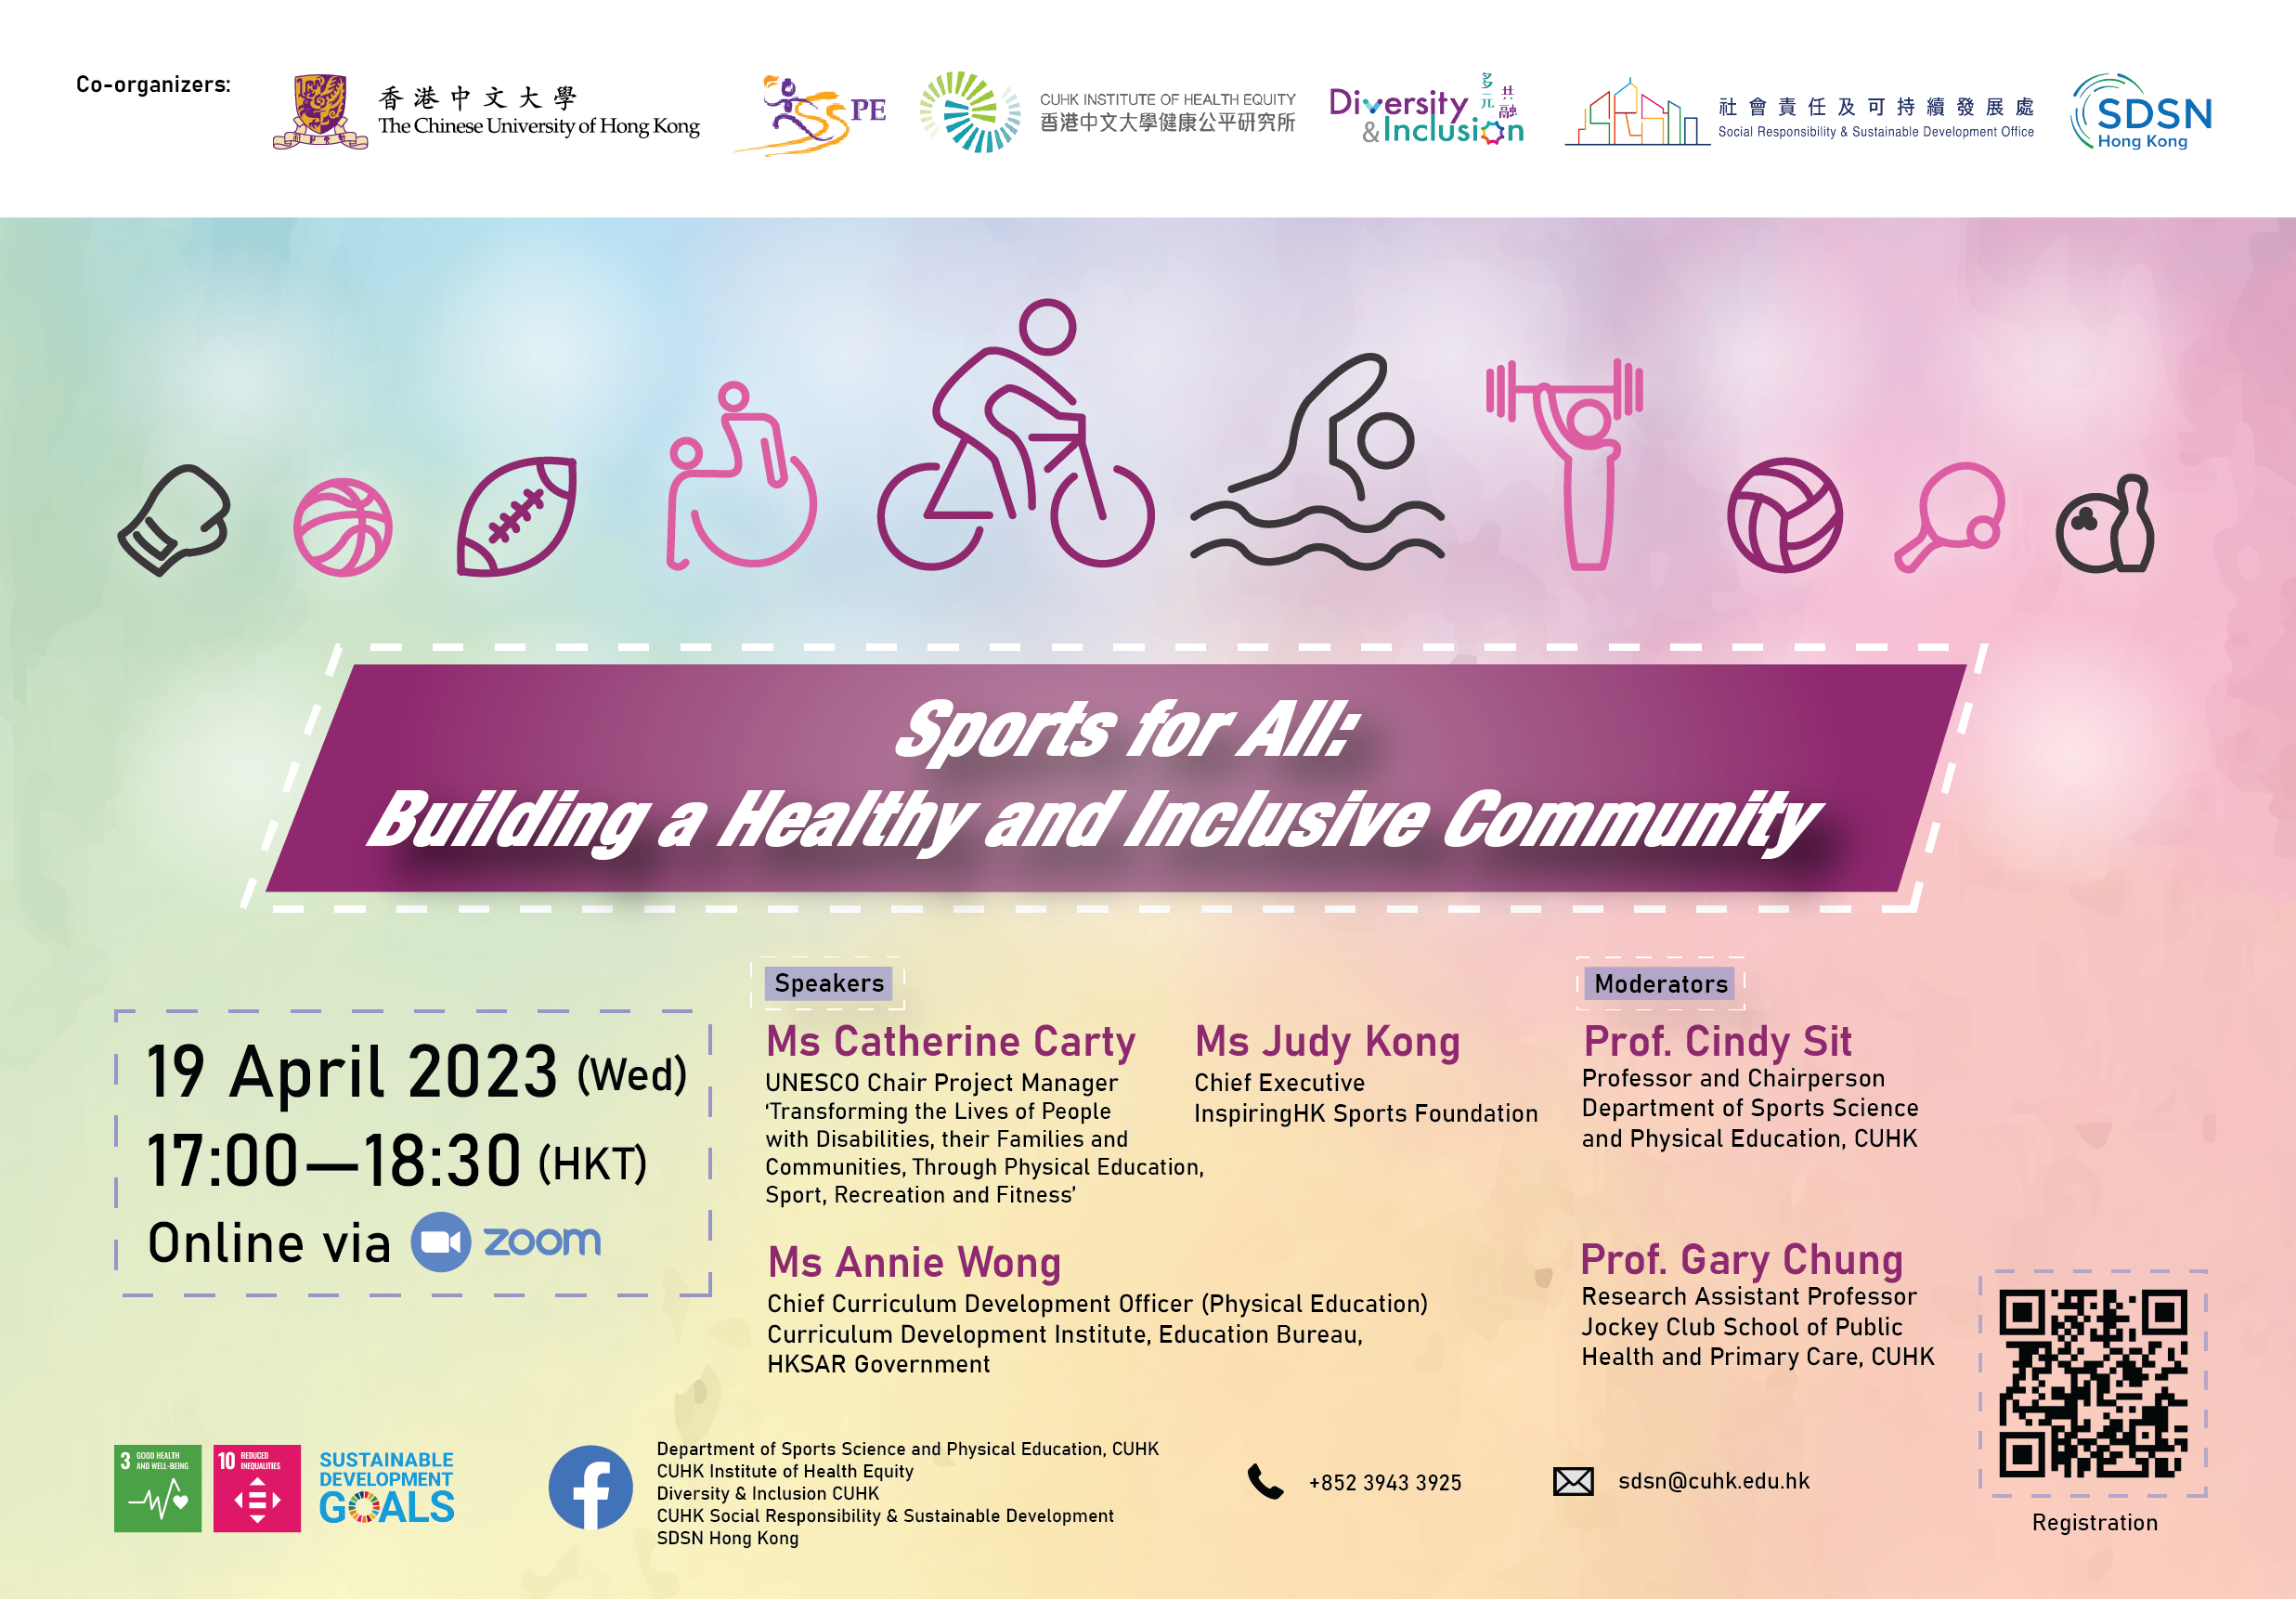 Webinar: ‘Sports for All: Building a Healthy and Inclusive Community’